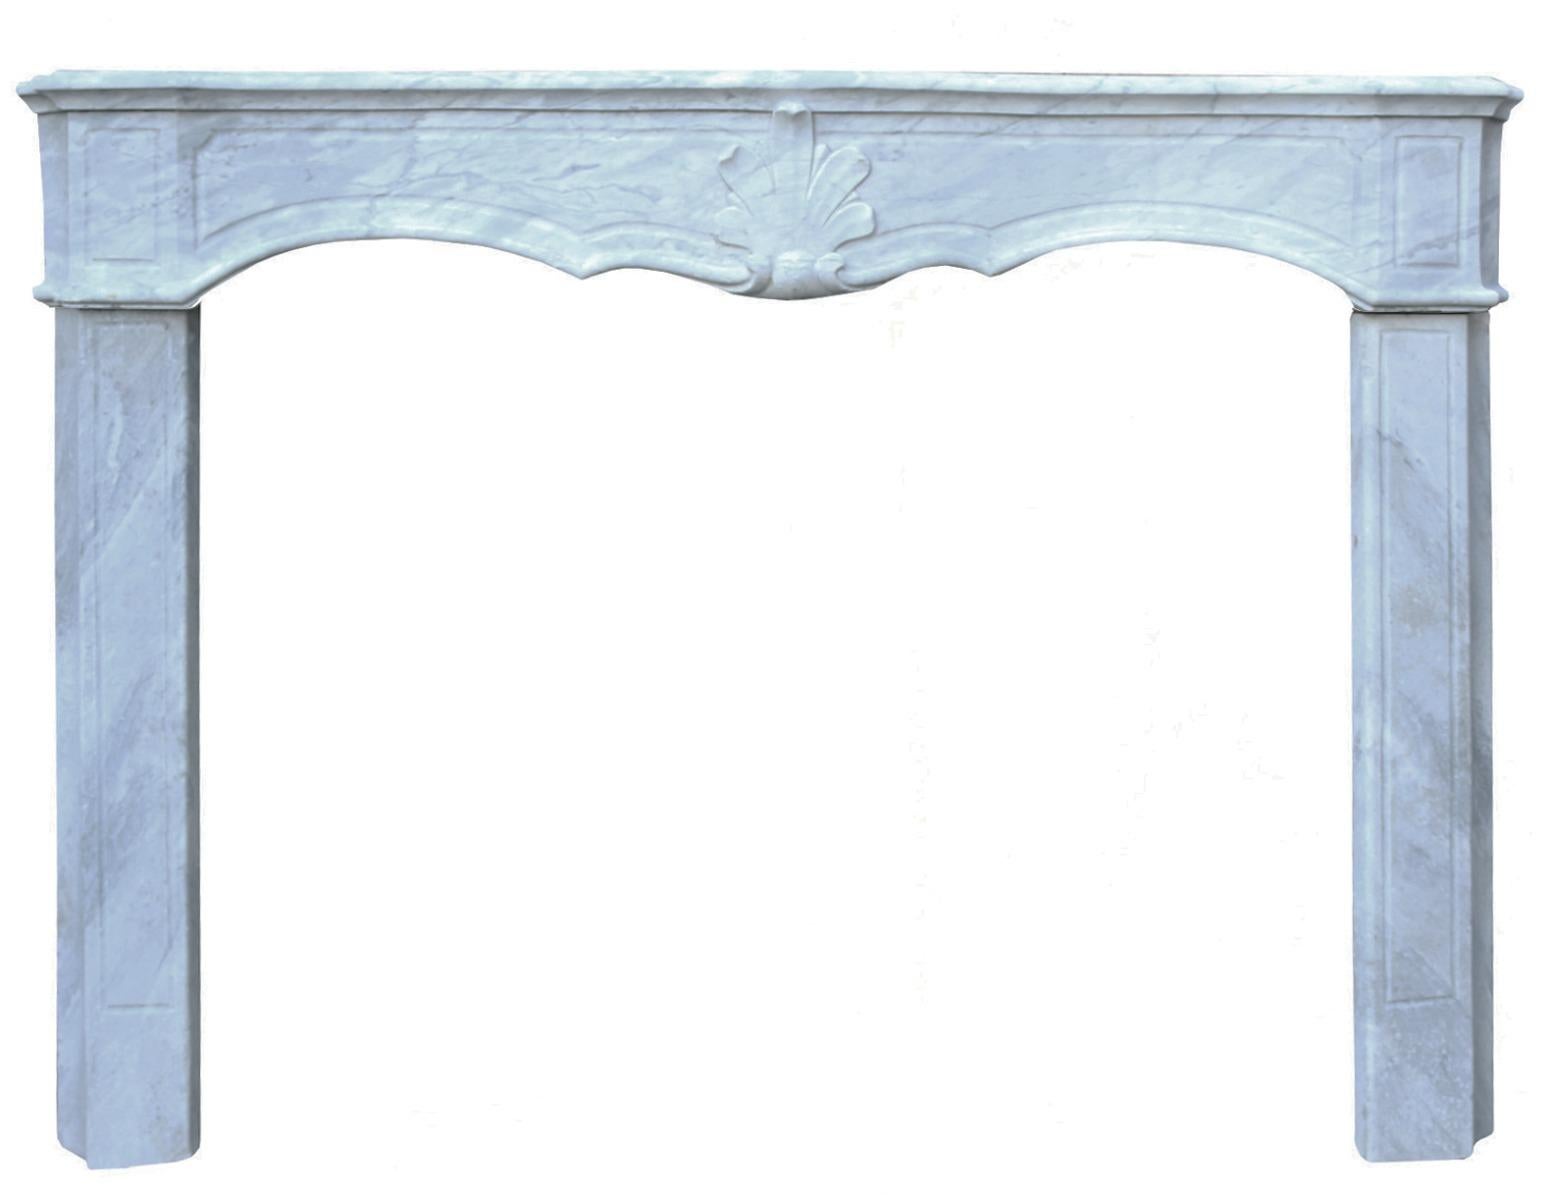 Antique Carrara Marble Fire Surround In Good Condition For Sale In Wormelow, Herefordshire